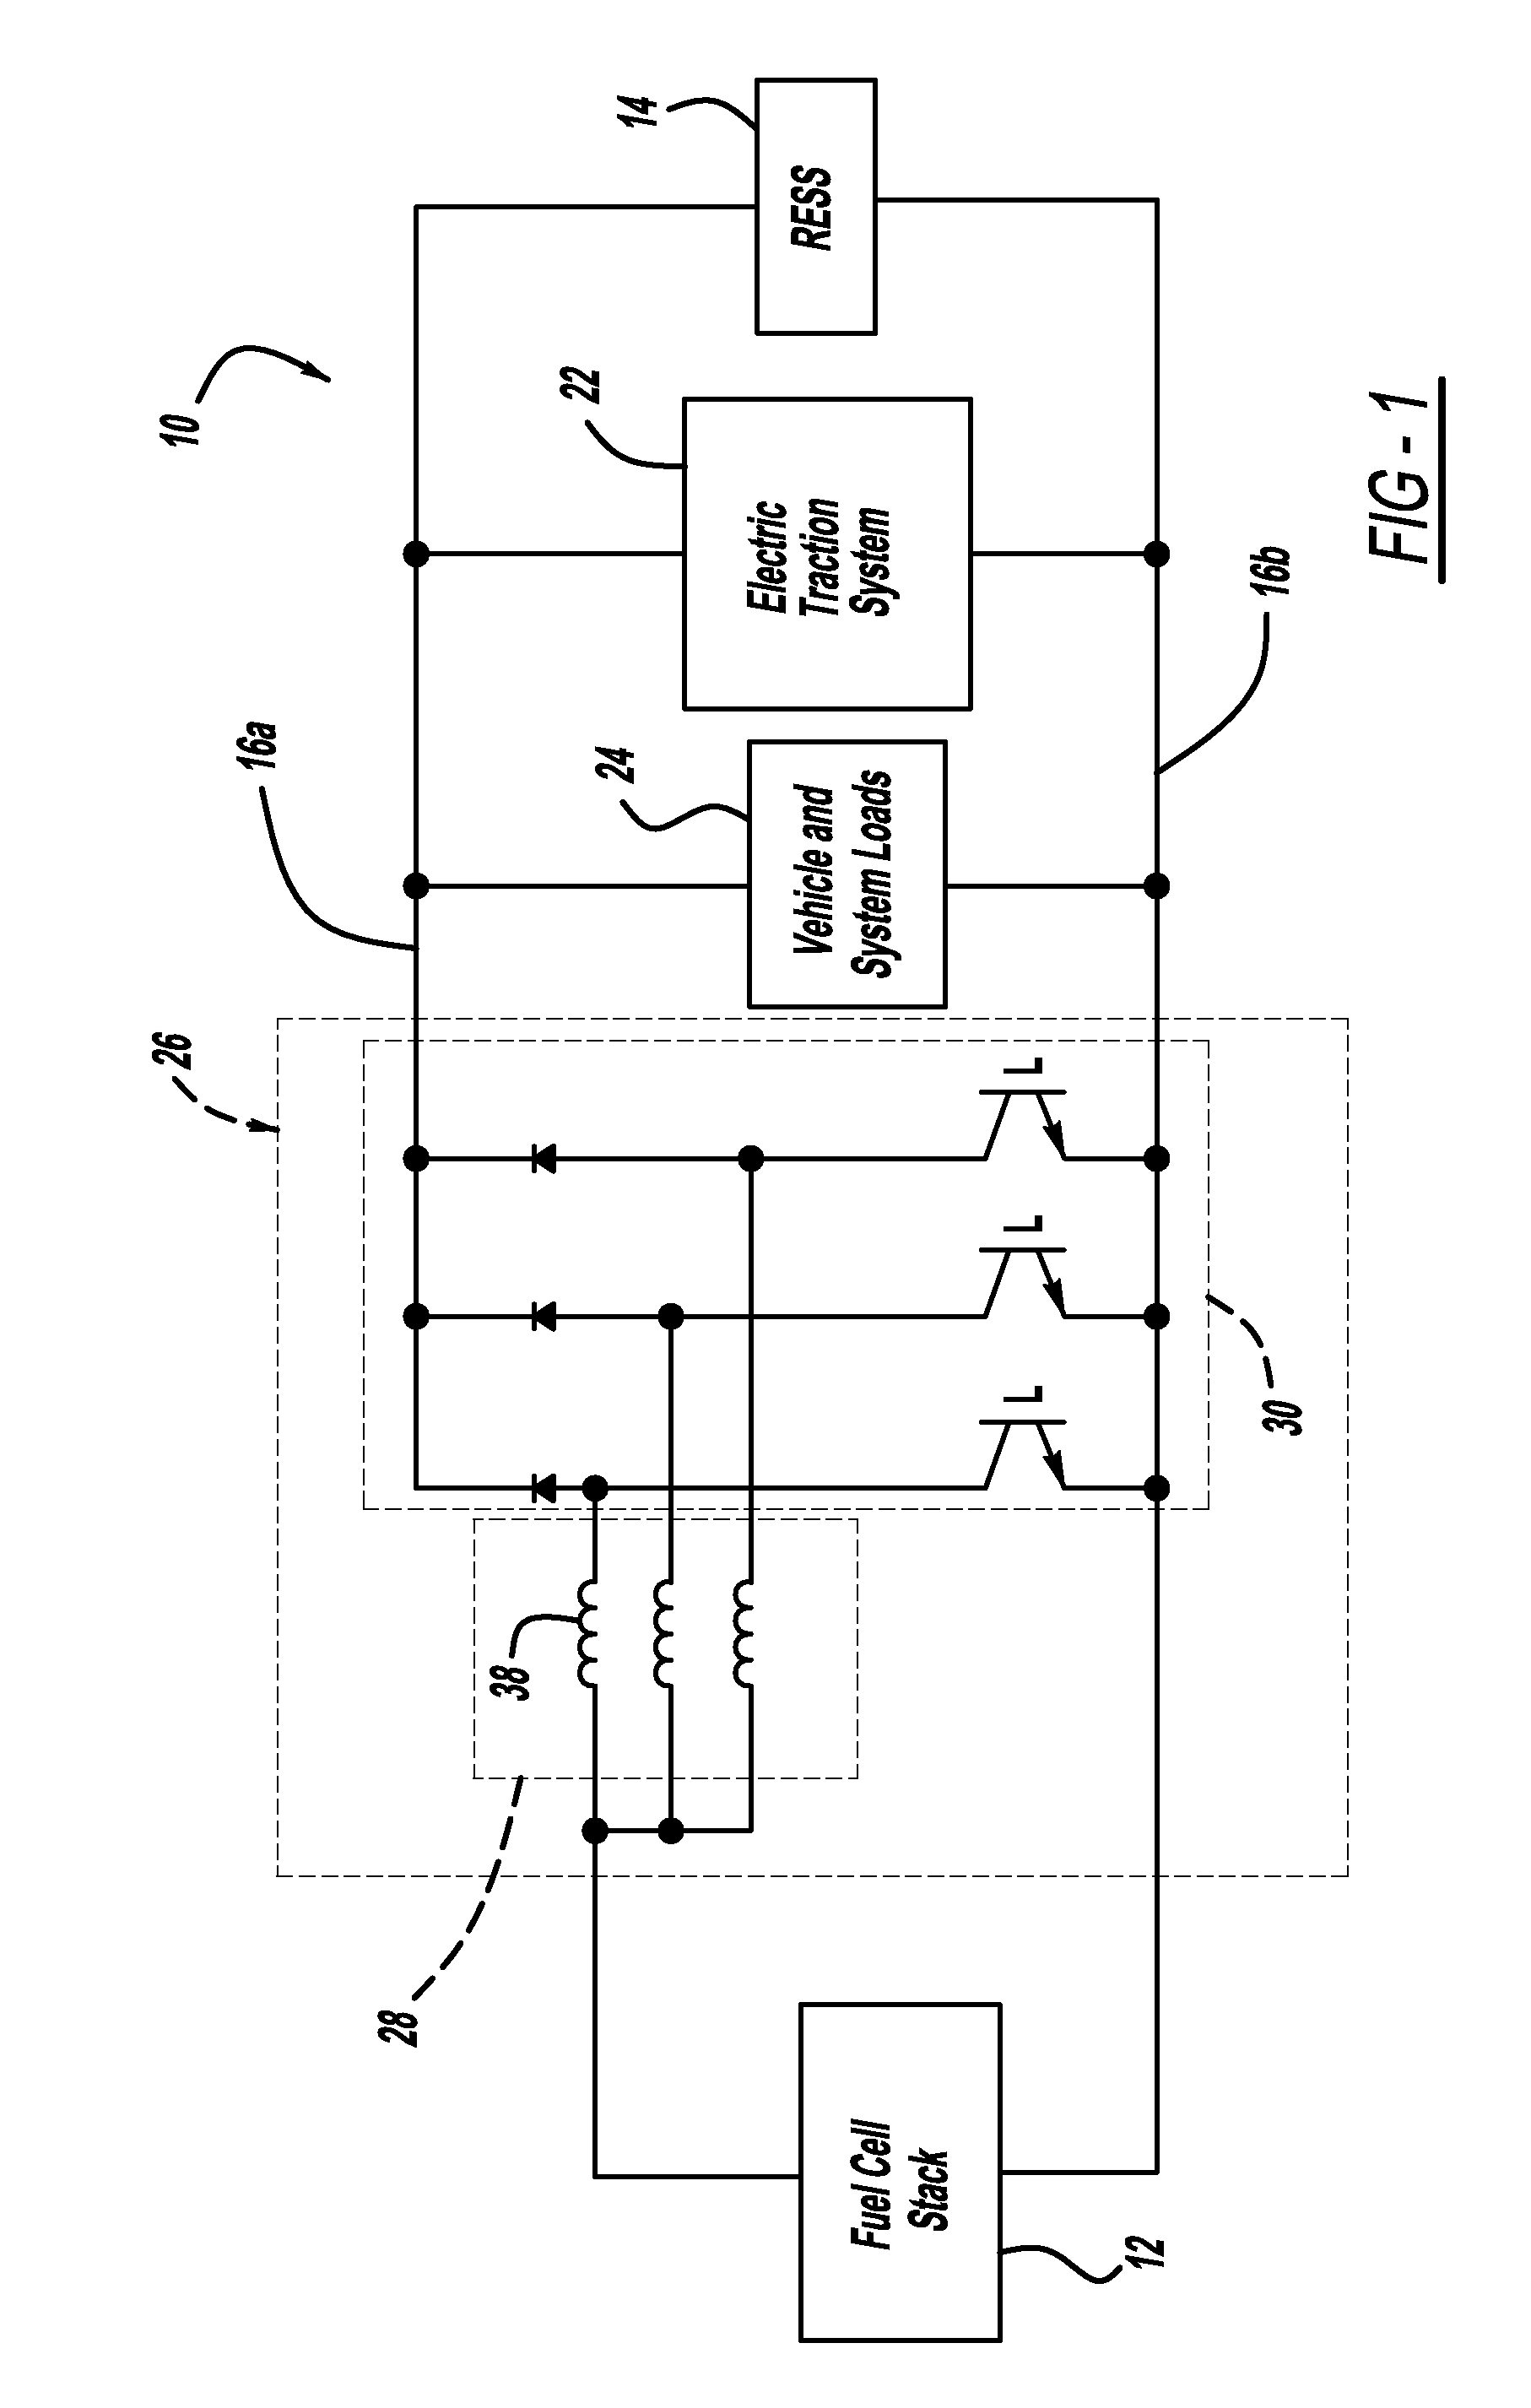 Dc-dc converter for fuel cell application using hybrid inductor core material